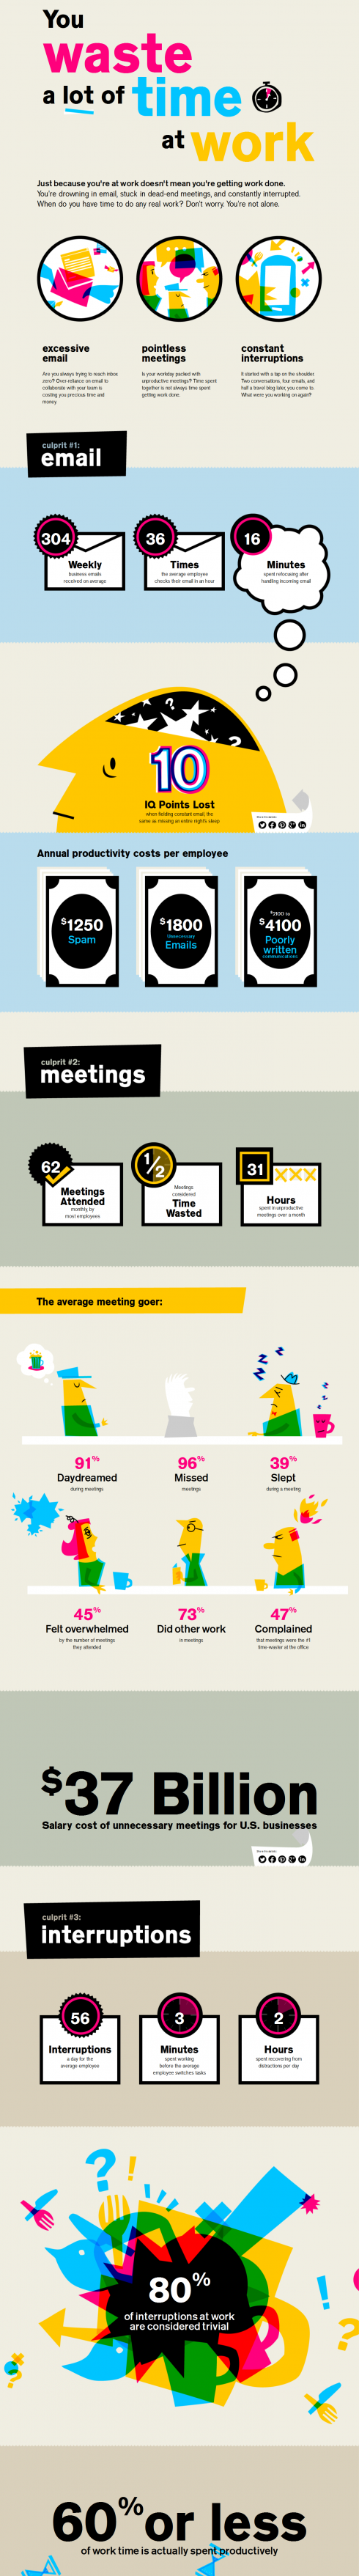 You Waste A Lot Of Time At Work - Infographic